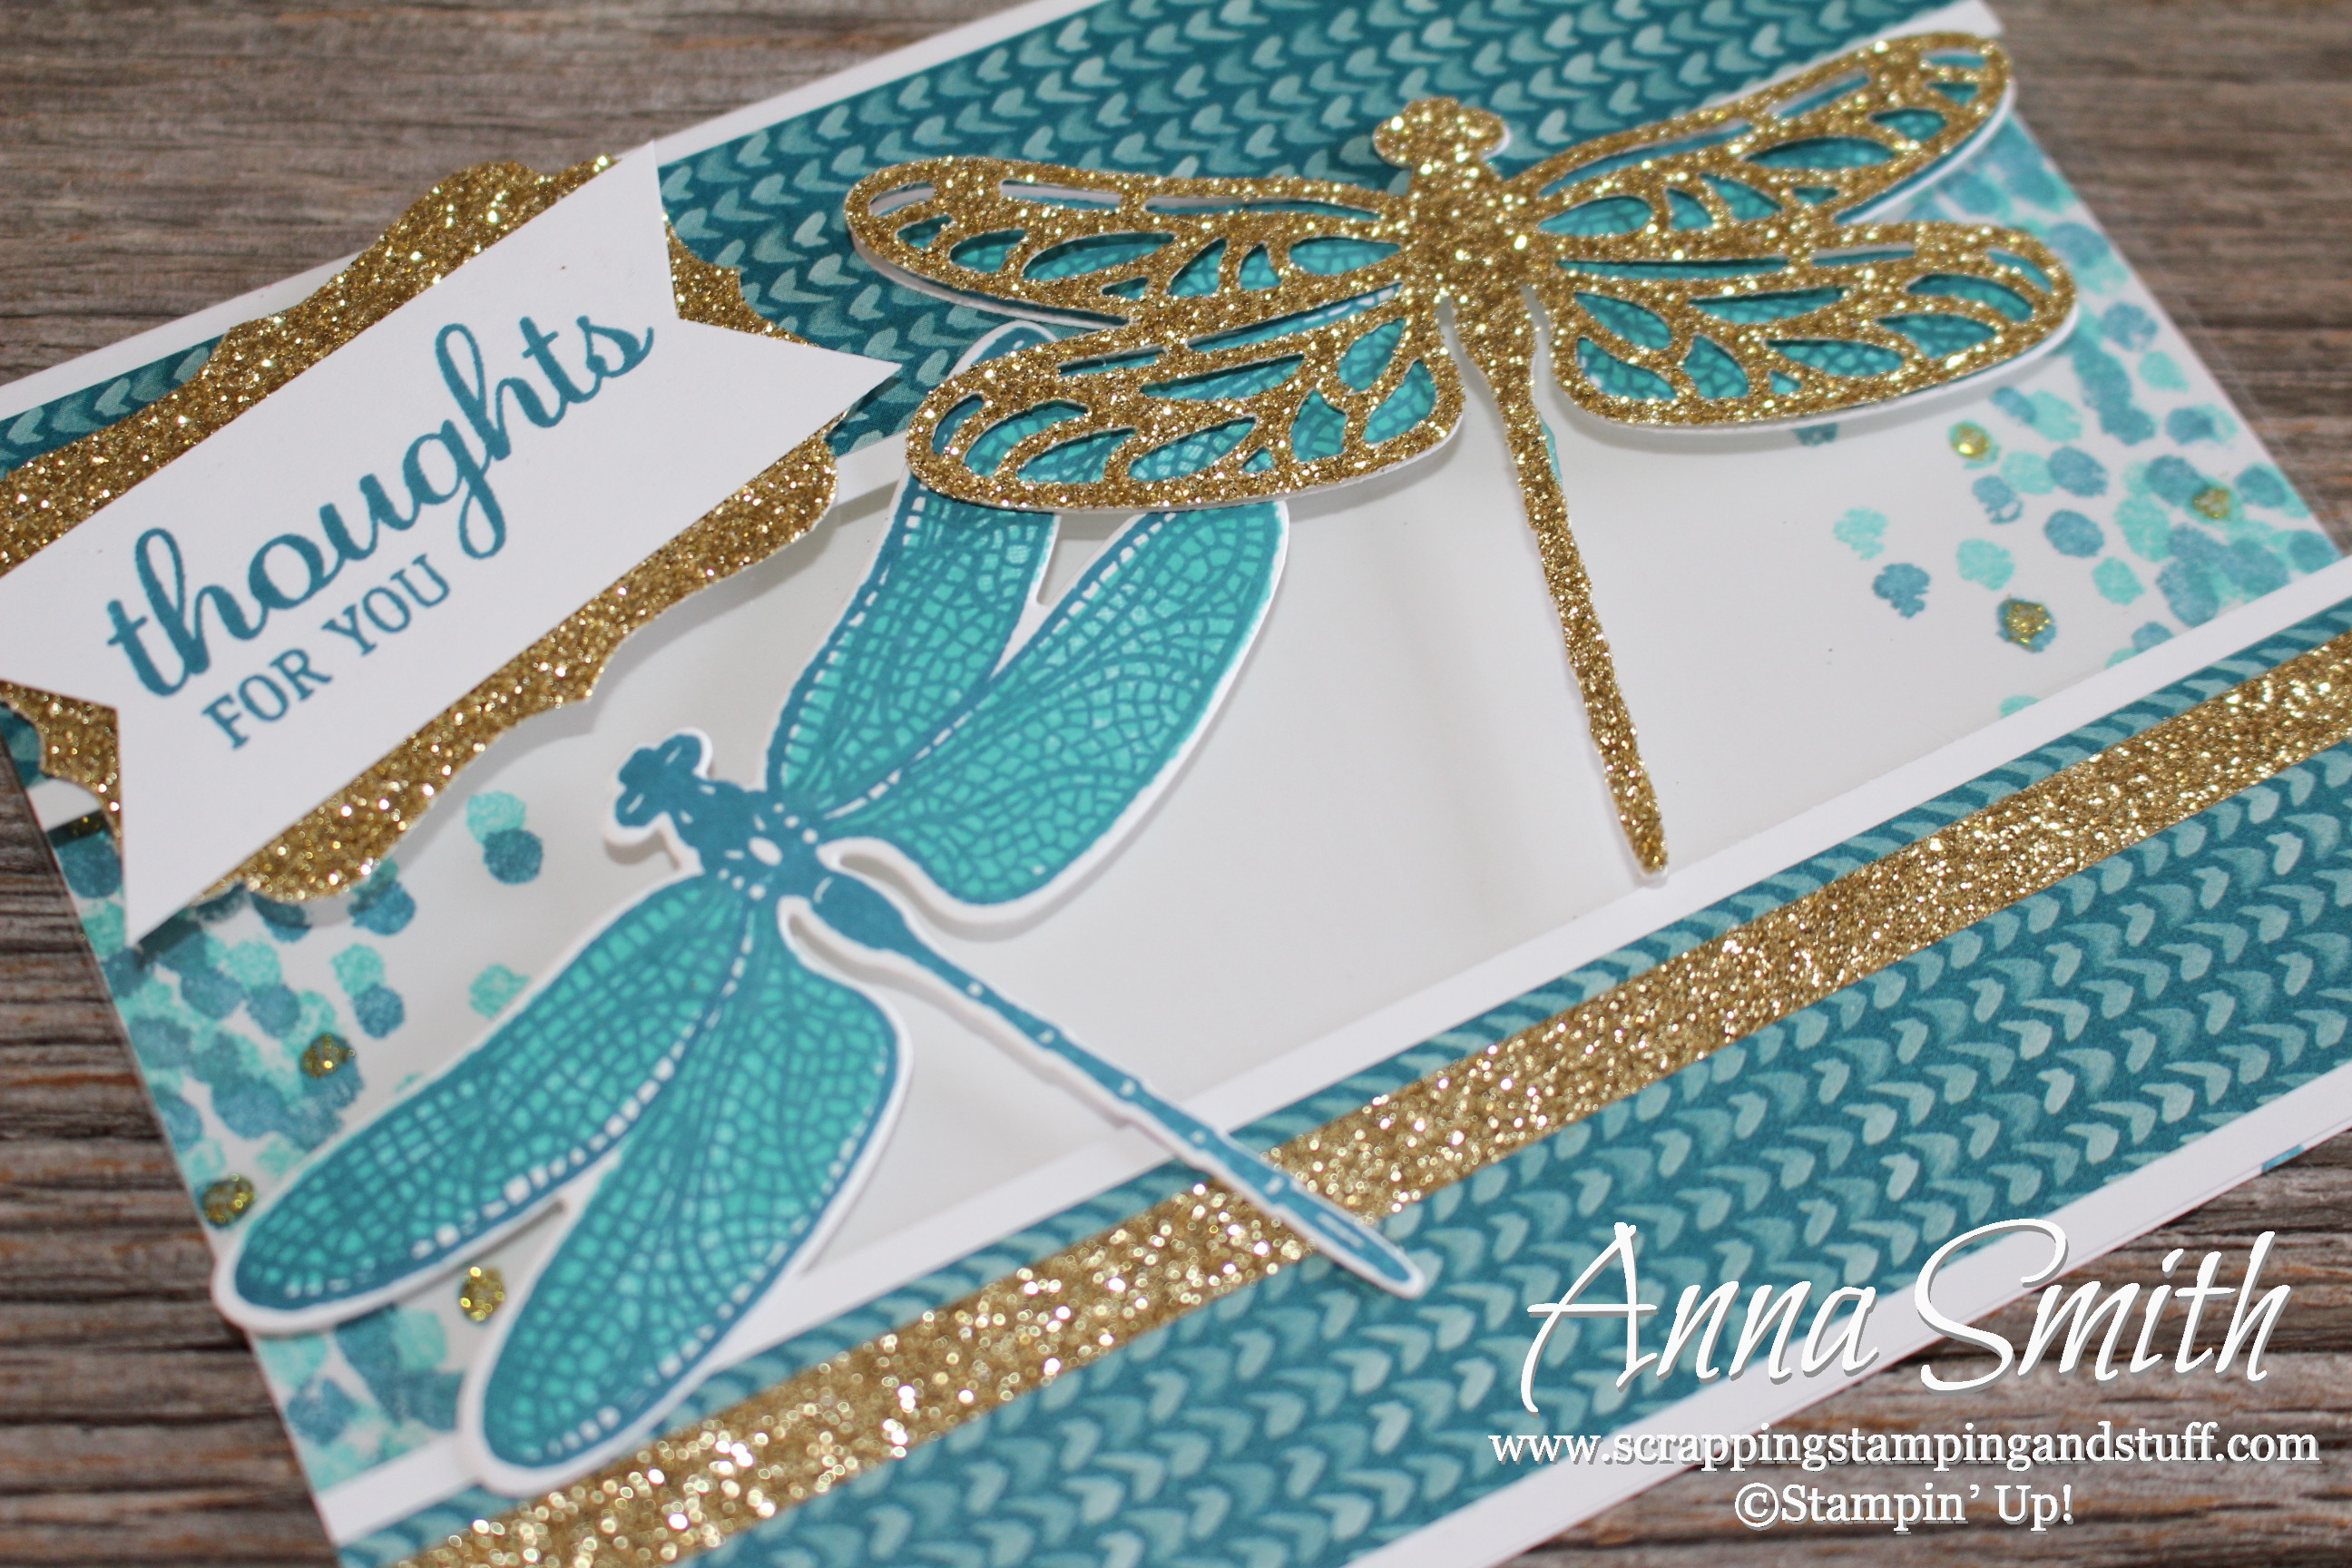 Stampin’ Up! Dragonfly Dreams Card Using the Floating Card Technique